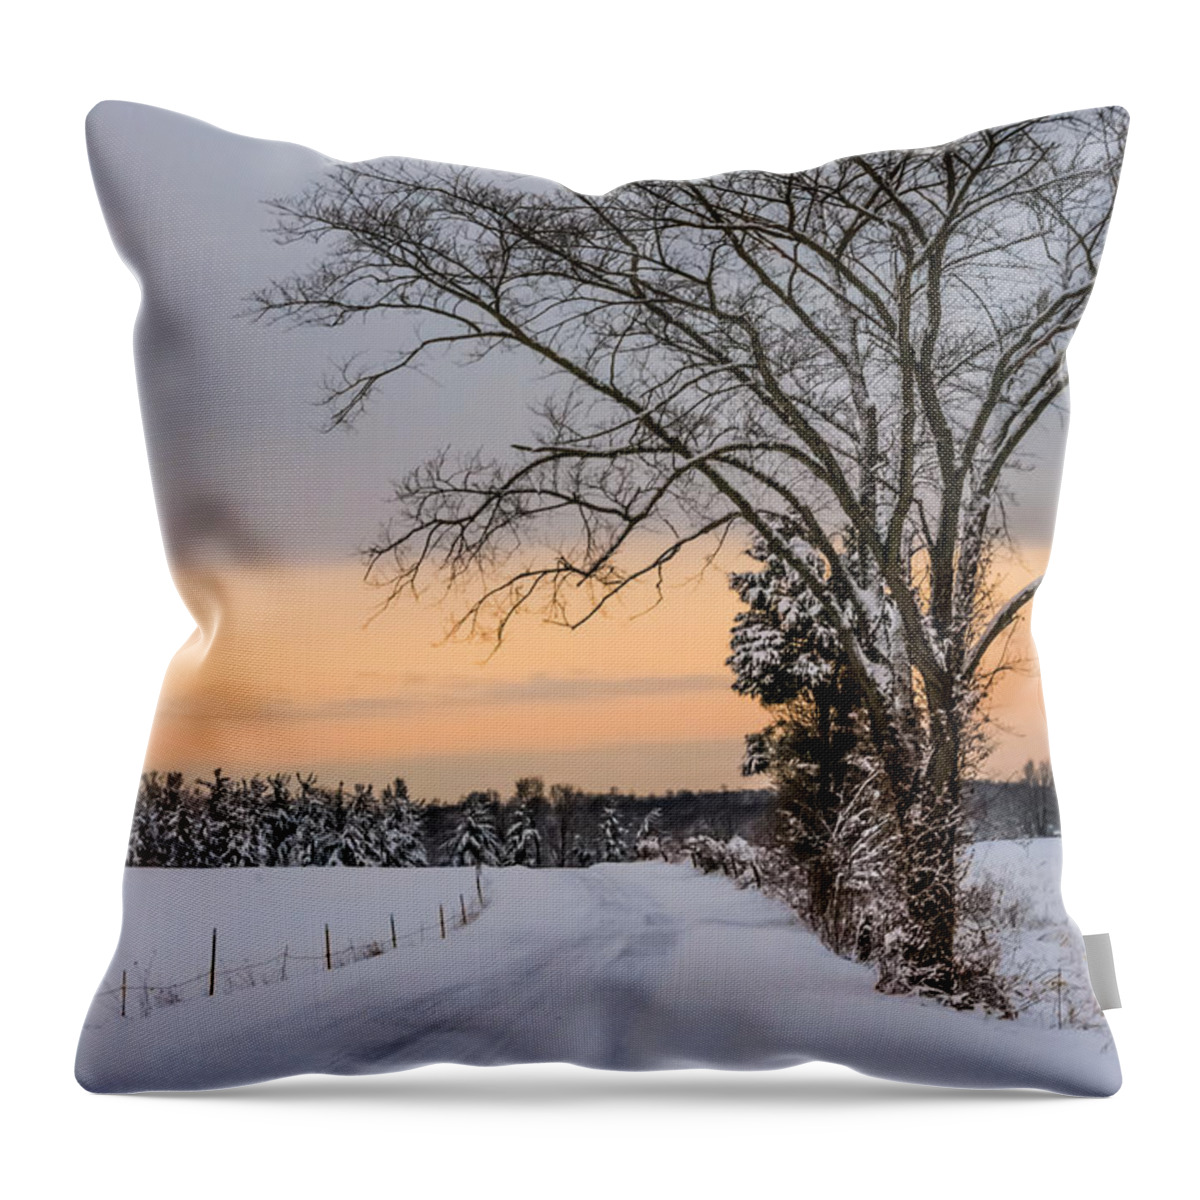 Snow Throw Pillow featuring the photograph Snowy Country Road by Holden The Moment